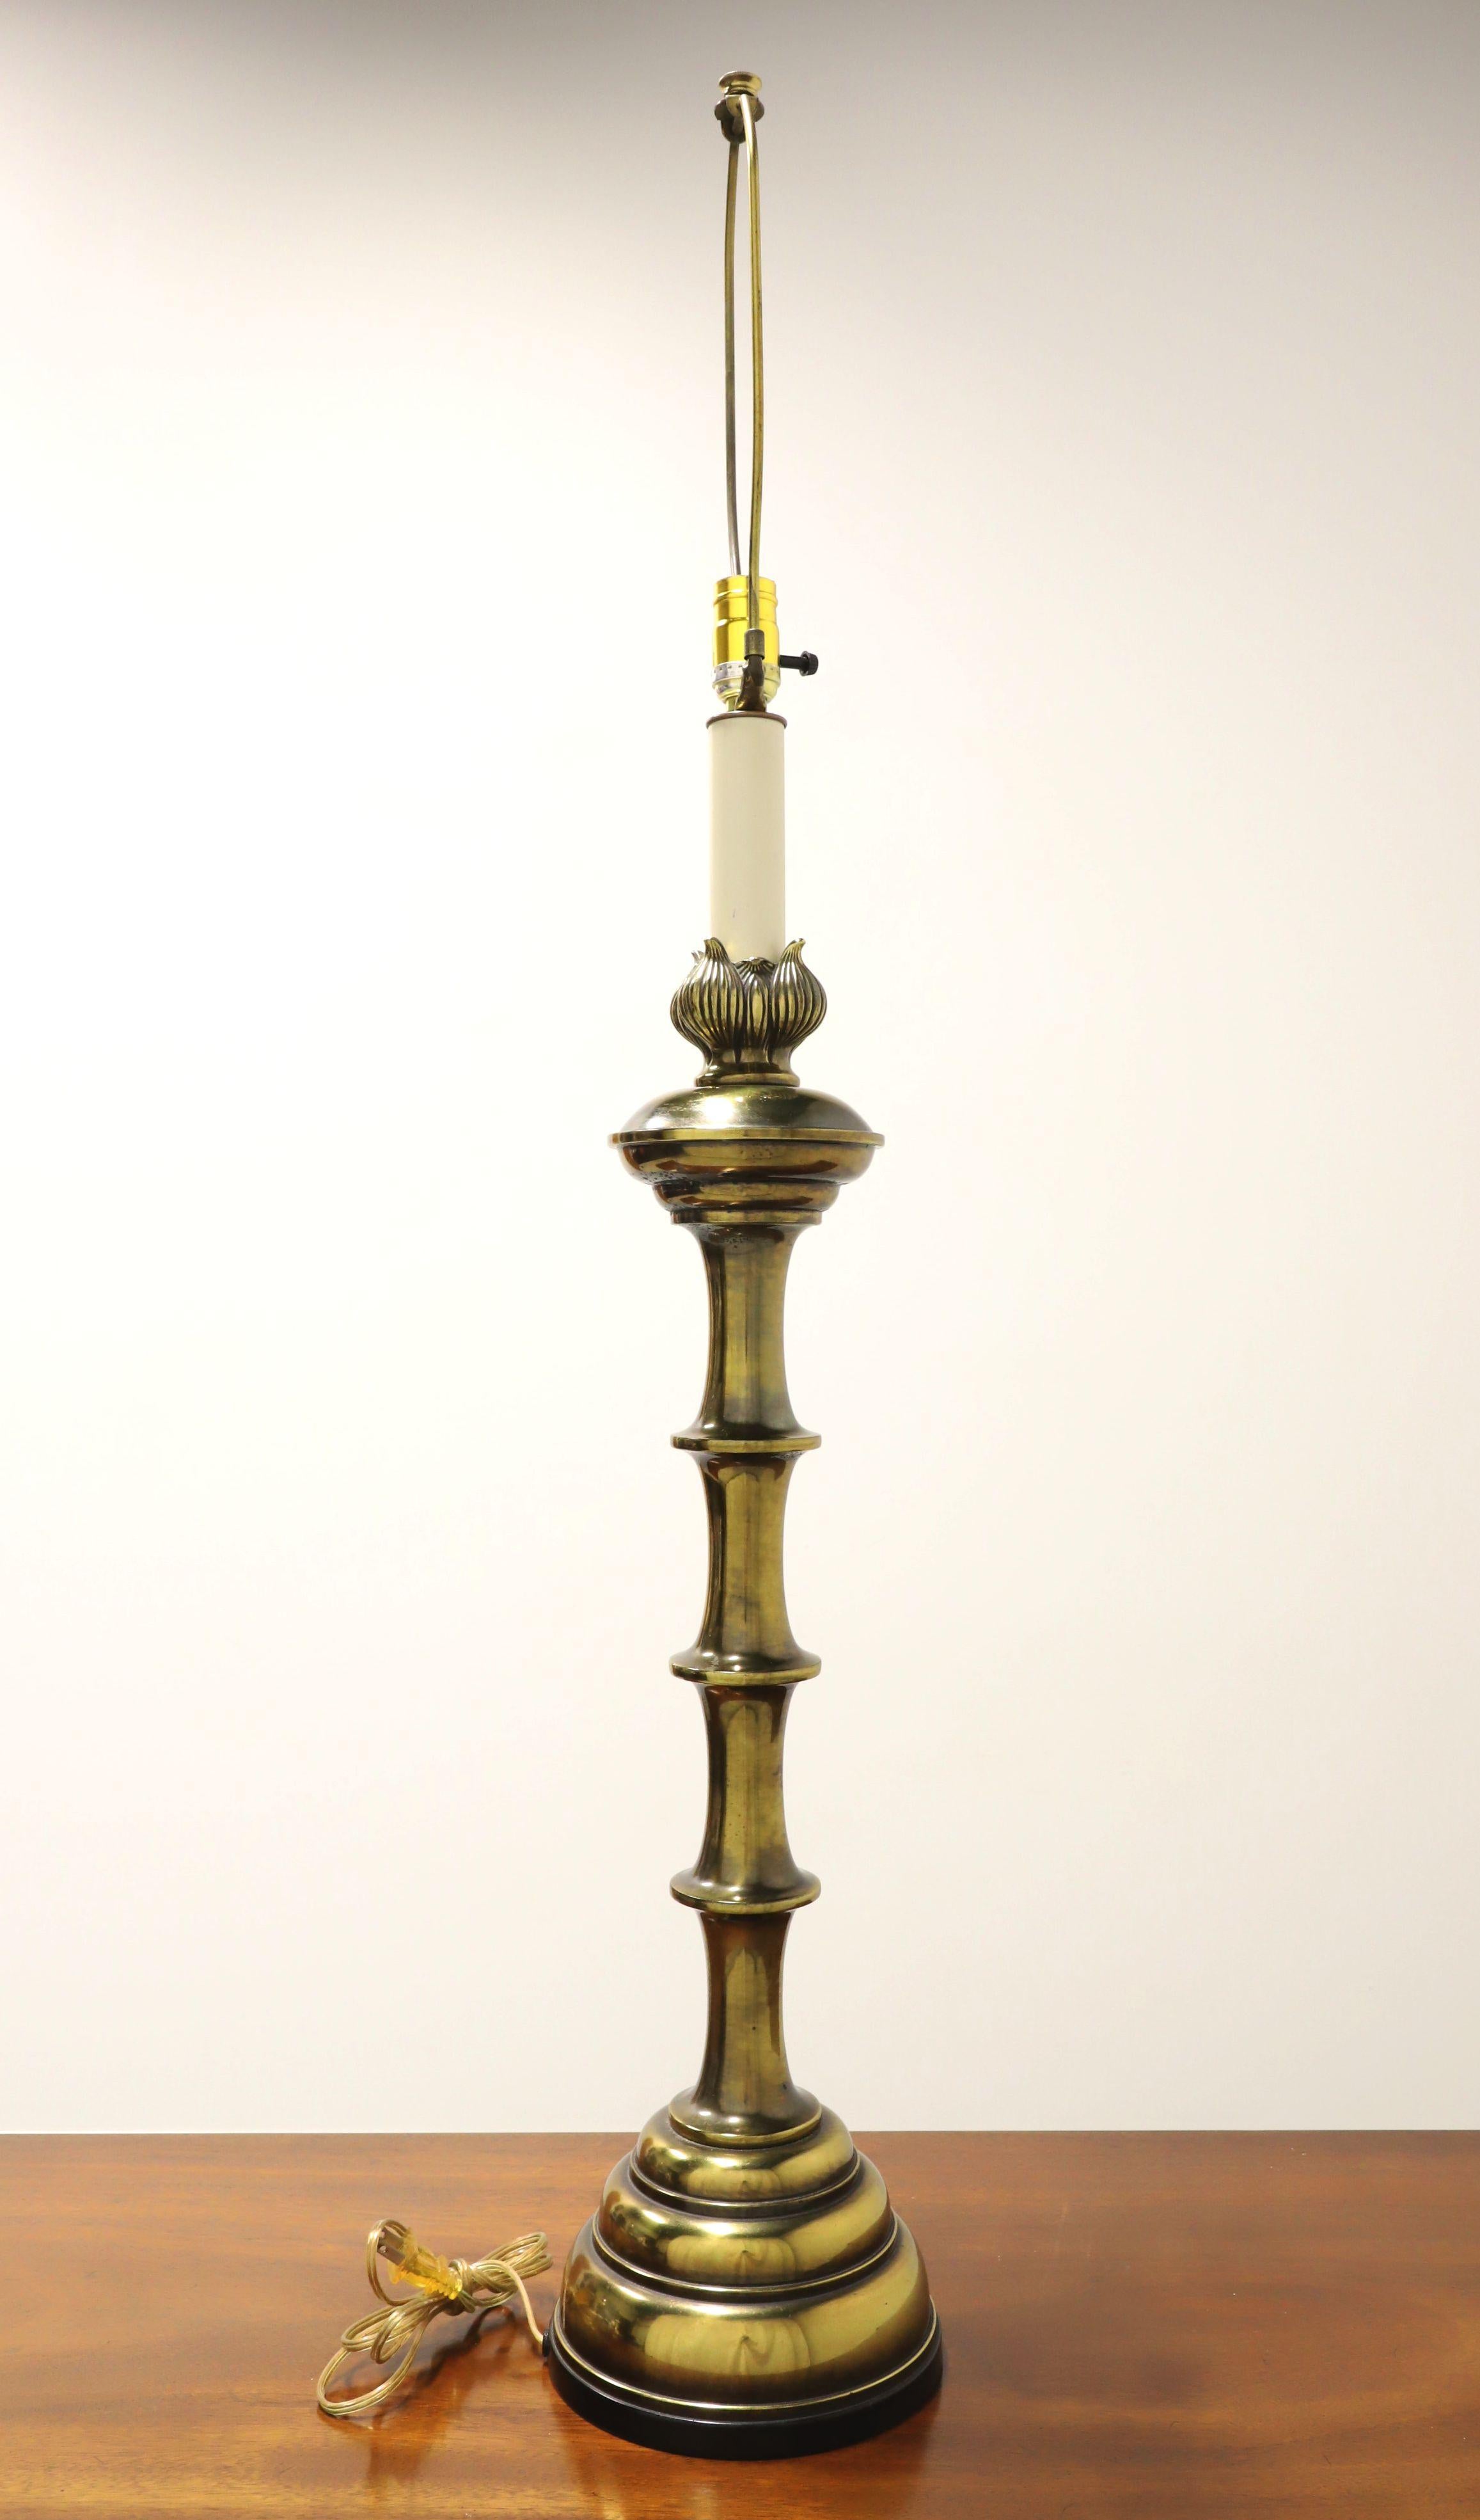 A Mid-20th Century style table lamp, unbranded. Made of solid brass with a candlestick shape, distinctive faux bamboo like design, decoratively molded top with white neck, and a brass base. Has a removable metal harp and brass cap finial. Single